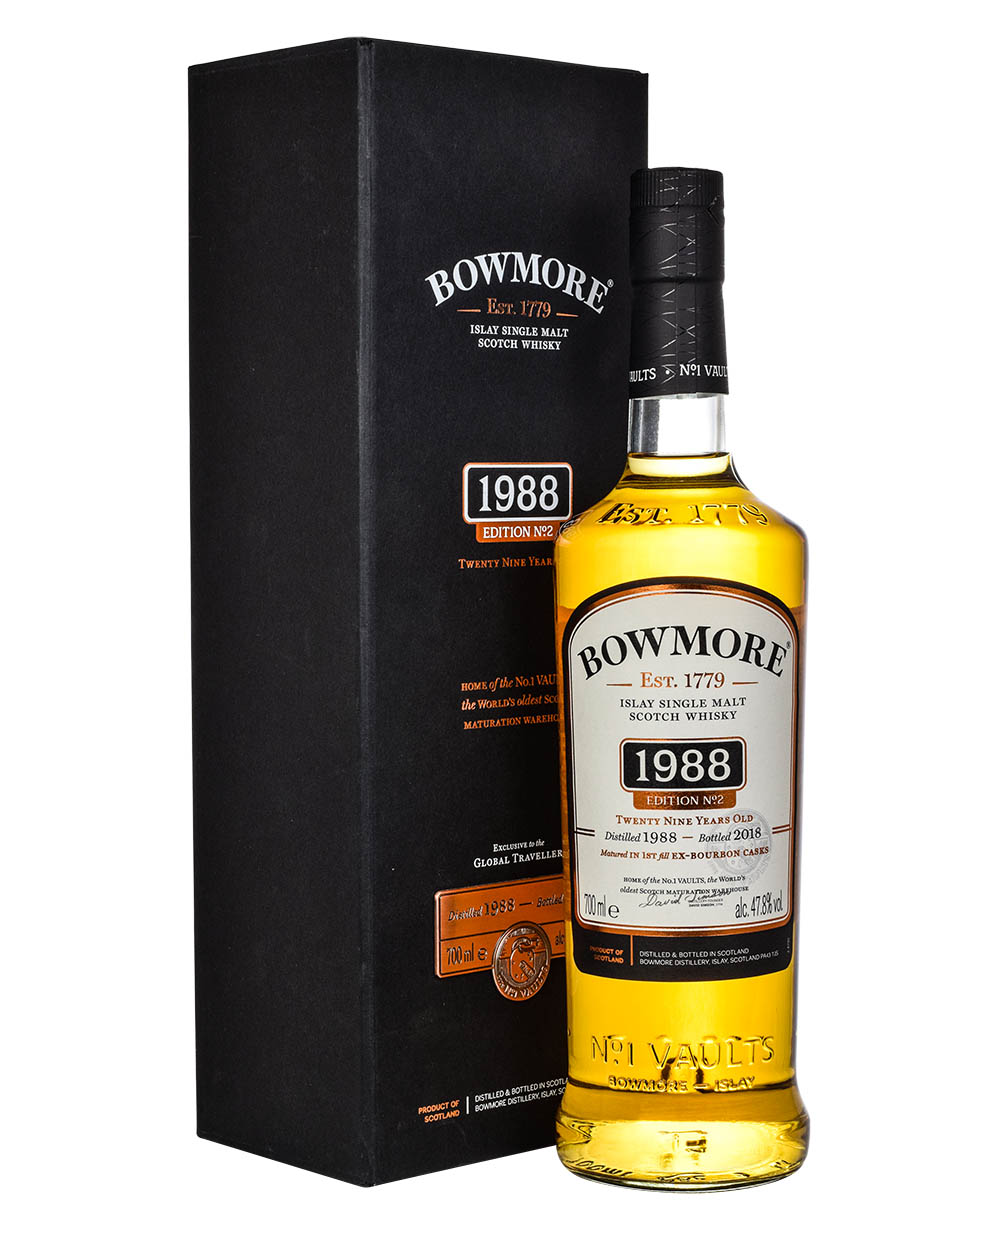 Bowmore 29 Years Old Vault 1988 Edition No 2 - Musthave Malts